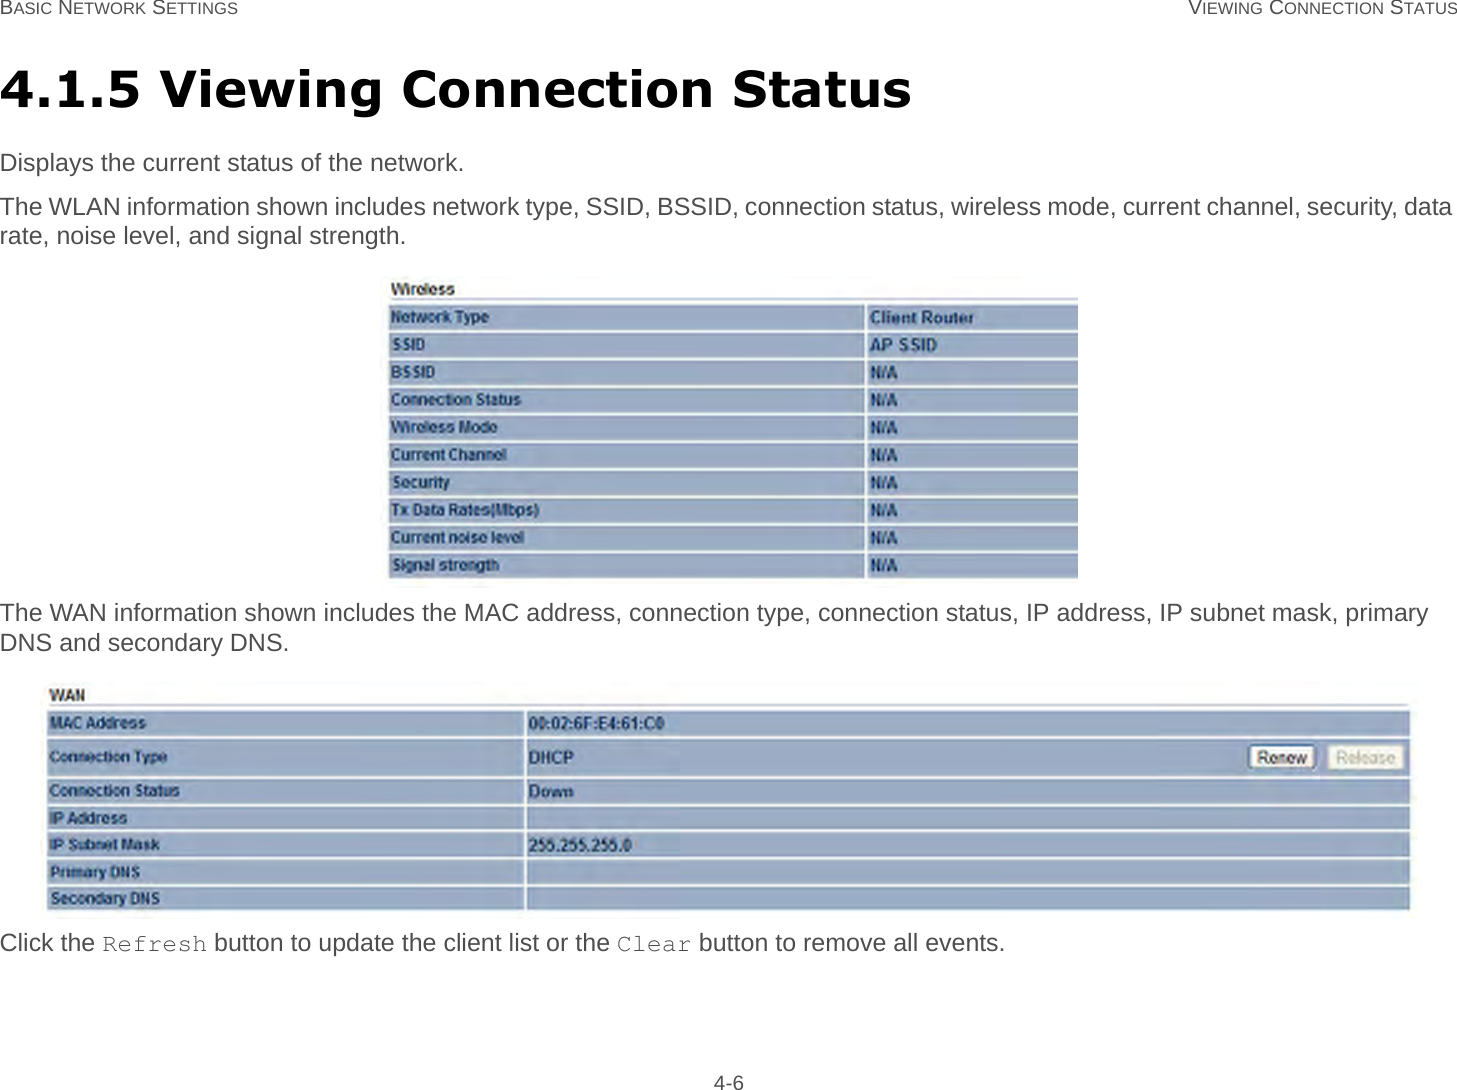 BASIC NETWORK SETTINGS VIEWING CONNECTION STATUS 4-64.1.5 Viewing Connection StatusDisplays the current status of the network.The WLAN information shown includes network type, SSID, BSSID, connection status, wireless mode, current channel, security, data rate, noise level, and signal strength.The WAN information shown includes the MAC address, connection type, connection status, IP address, IP subnet mask, primary DNS and secondary DNS.Click the Refresh button to update the client list or the Clear button to remove all events.